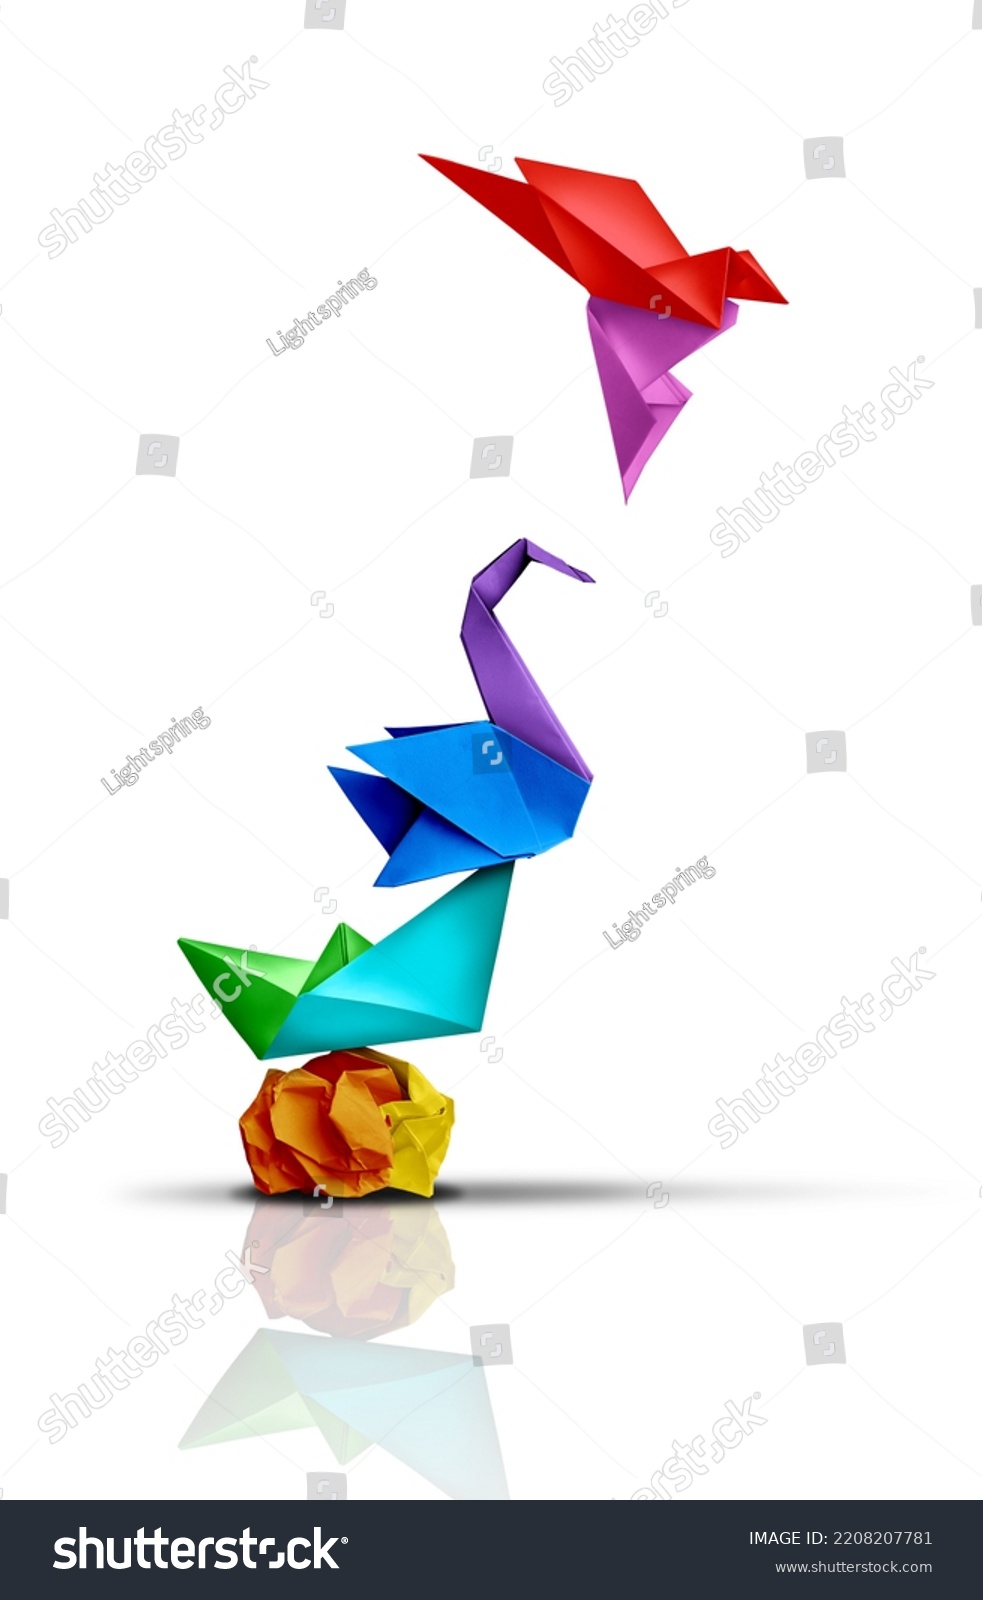 Reaching higher and success transformation or Transform and rise to succeed or improving concept and leadership in business through innovation or evolution with paper origami changed for the better.  #2208207781